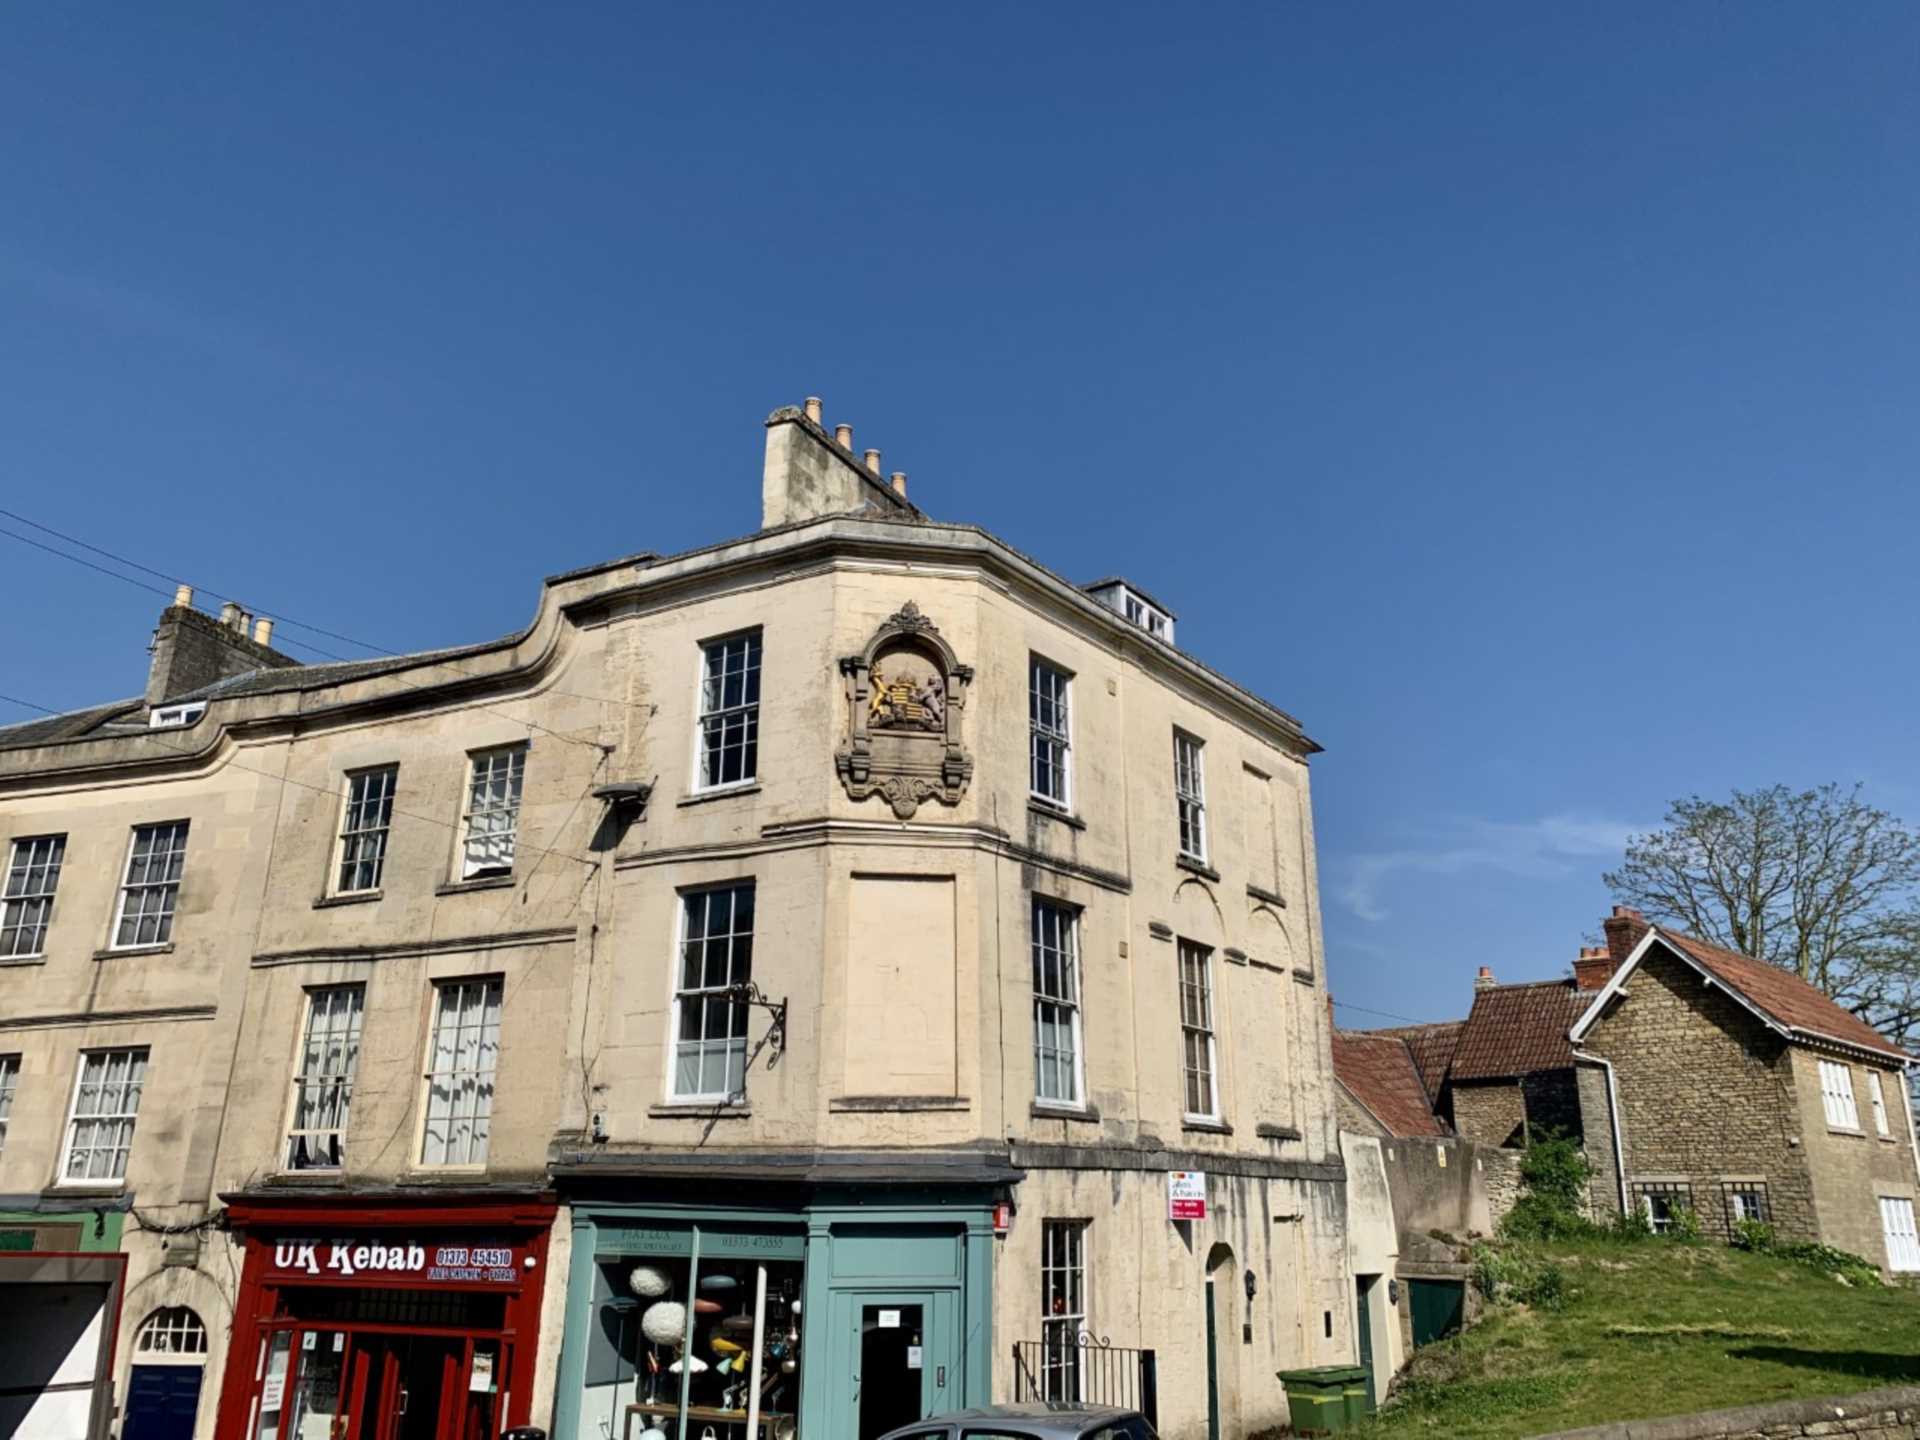 Swallows Property Letting - 2 Bedroom Maisonette, Bath Street, Frome